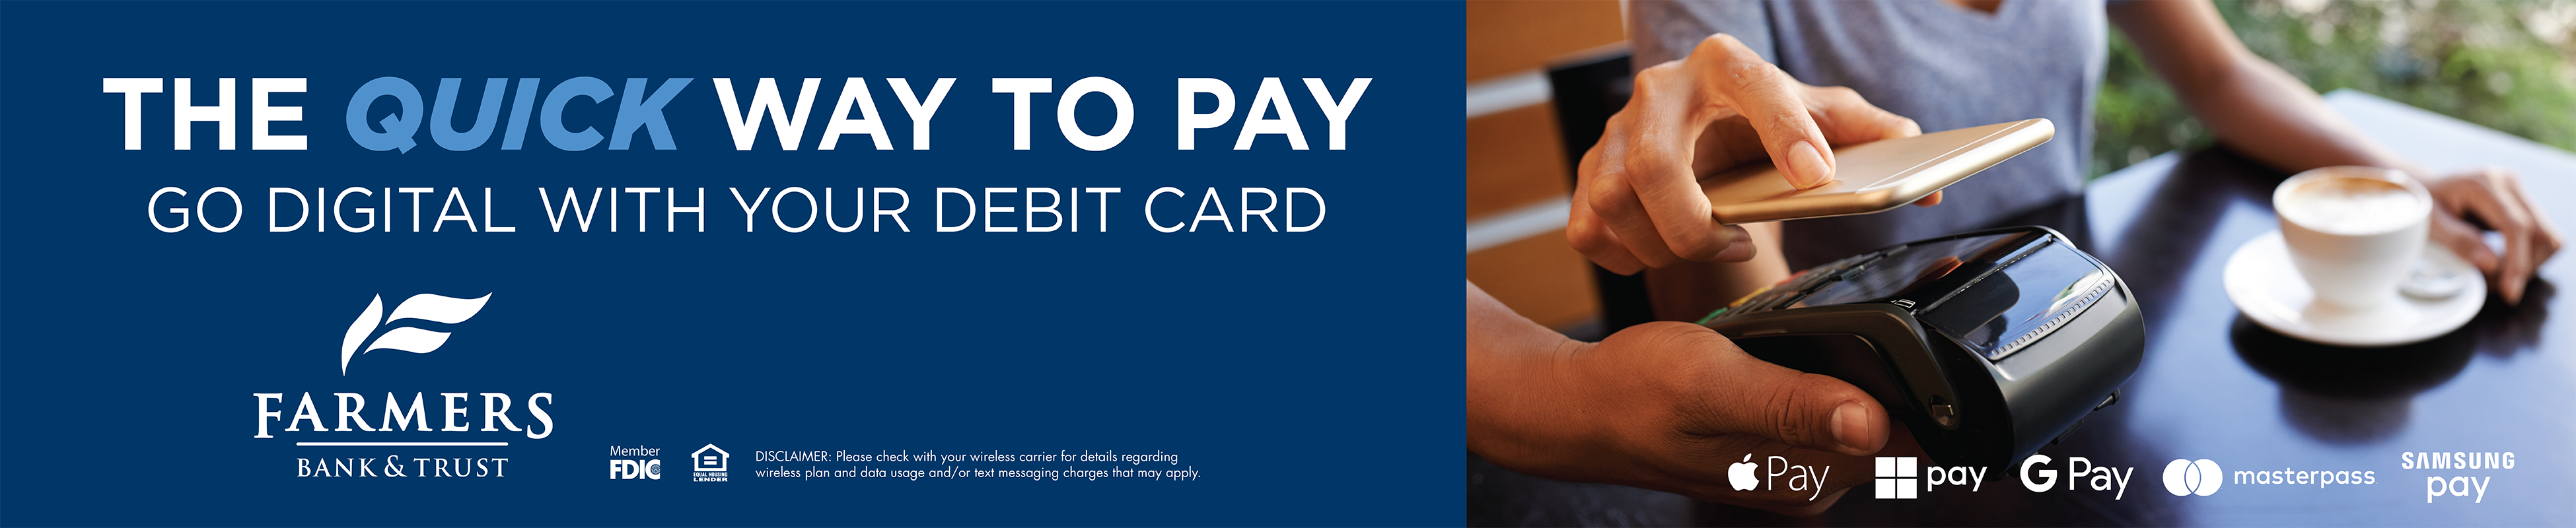 The Quick way to pay - go digital with your debit card